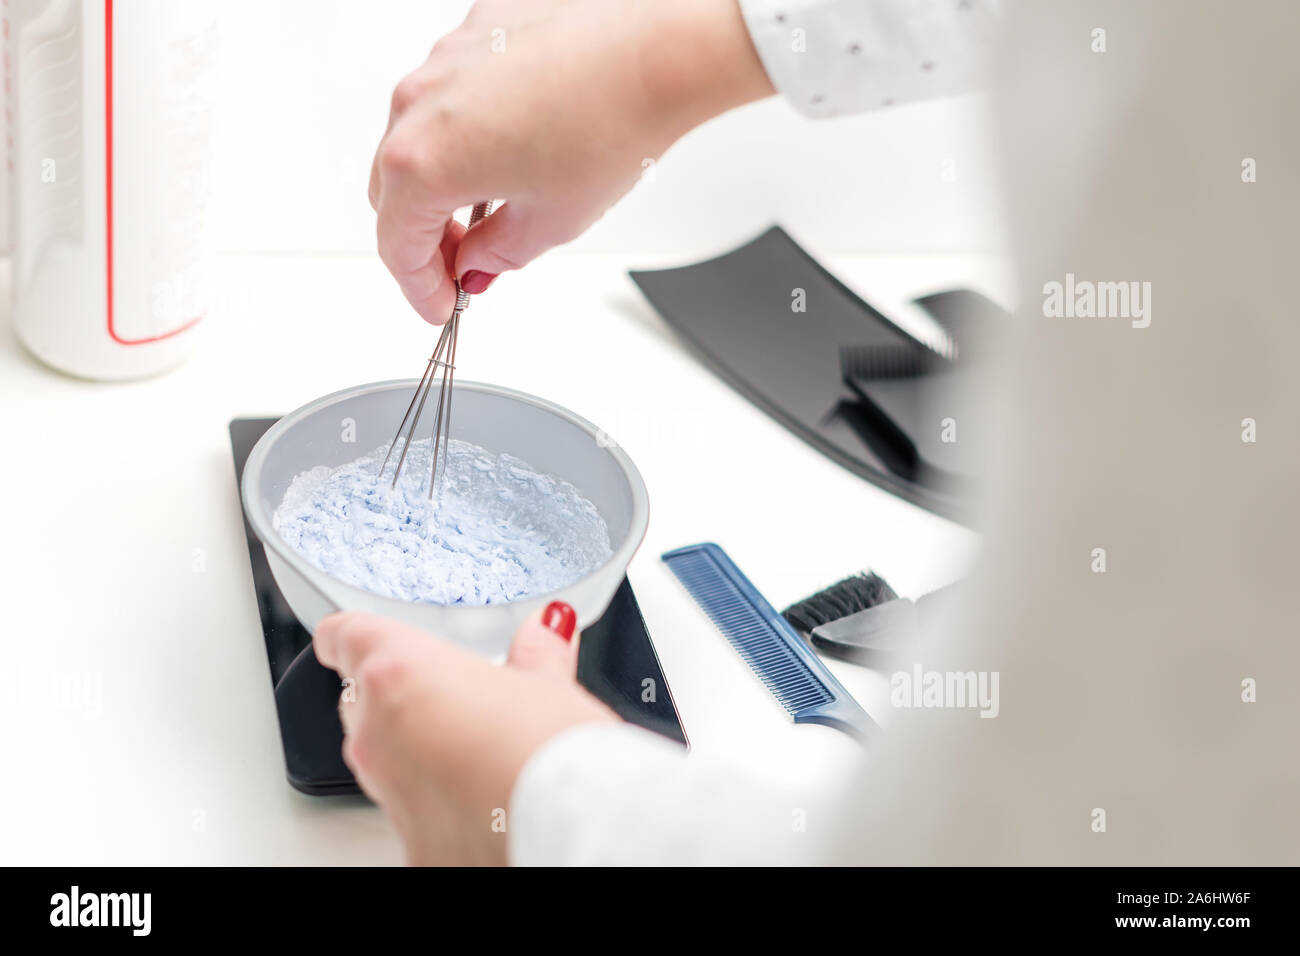 Hands of professional hairdresser are mixing hair dye in a bowl. Stylist  makes a white color mix for coloring hair at salon close up Stock Photo -  Alamy